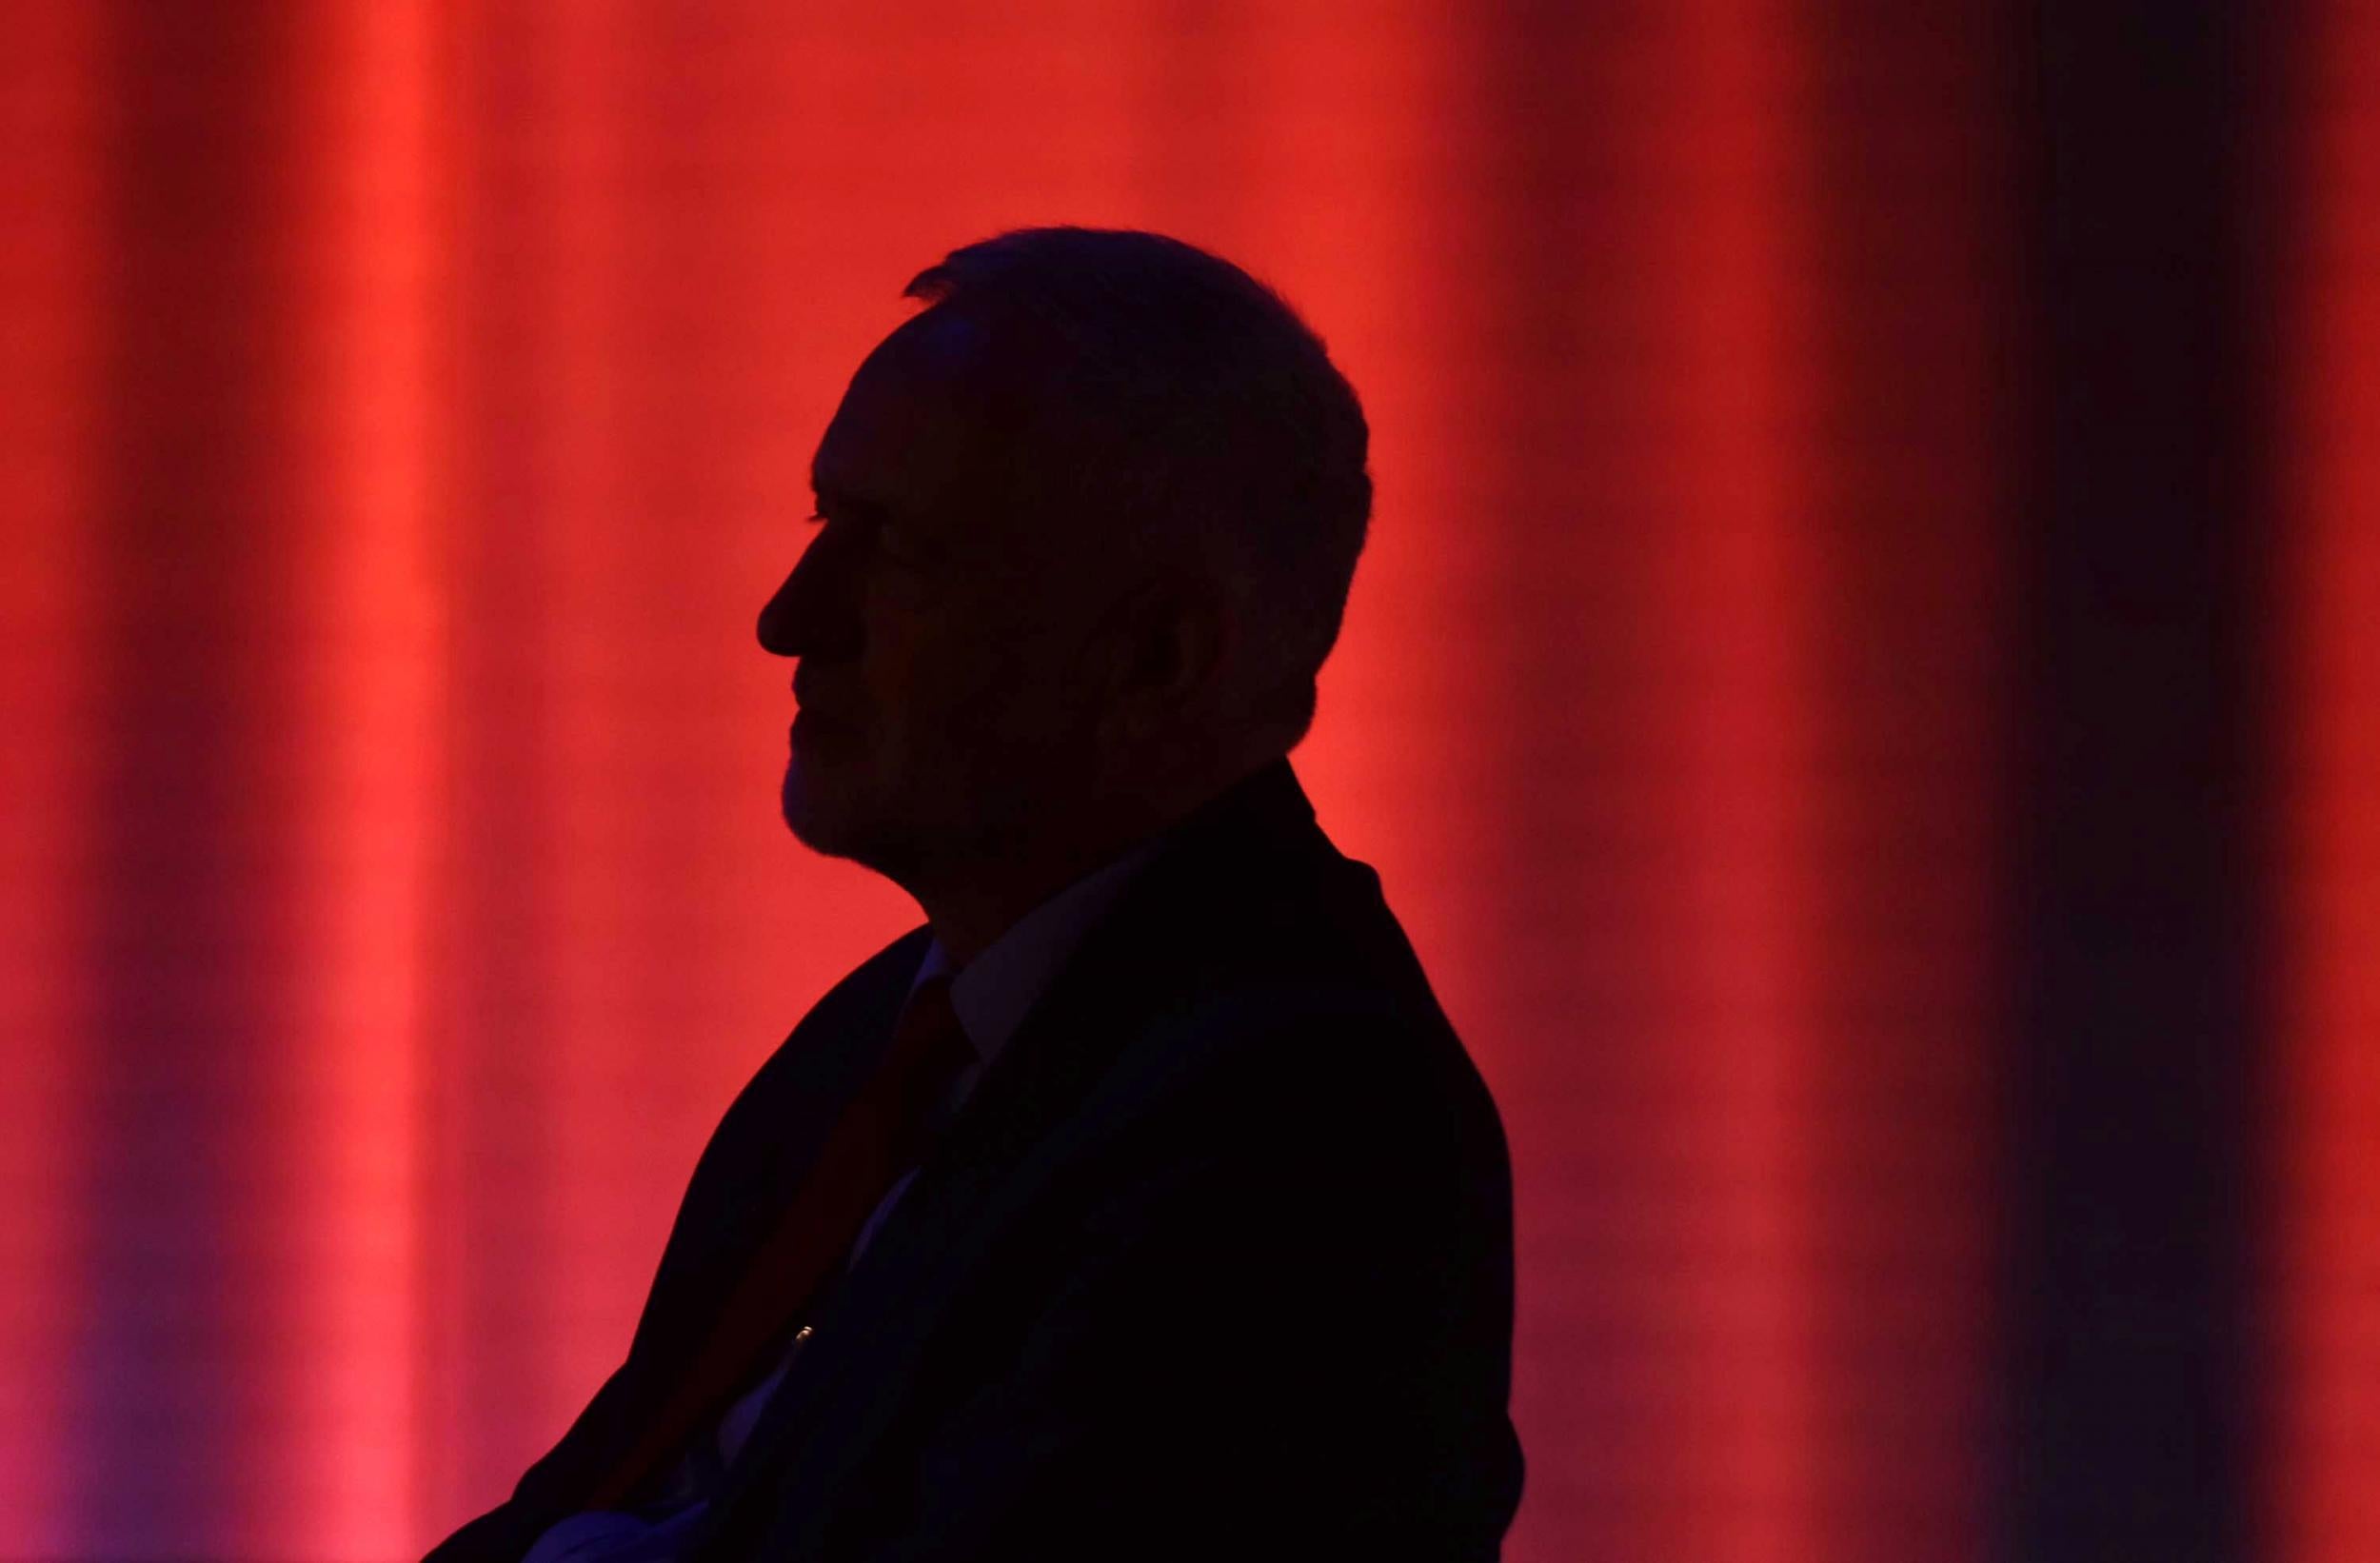 Corbyn has remained clear that the UK would leave the single market under a Labour government